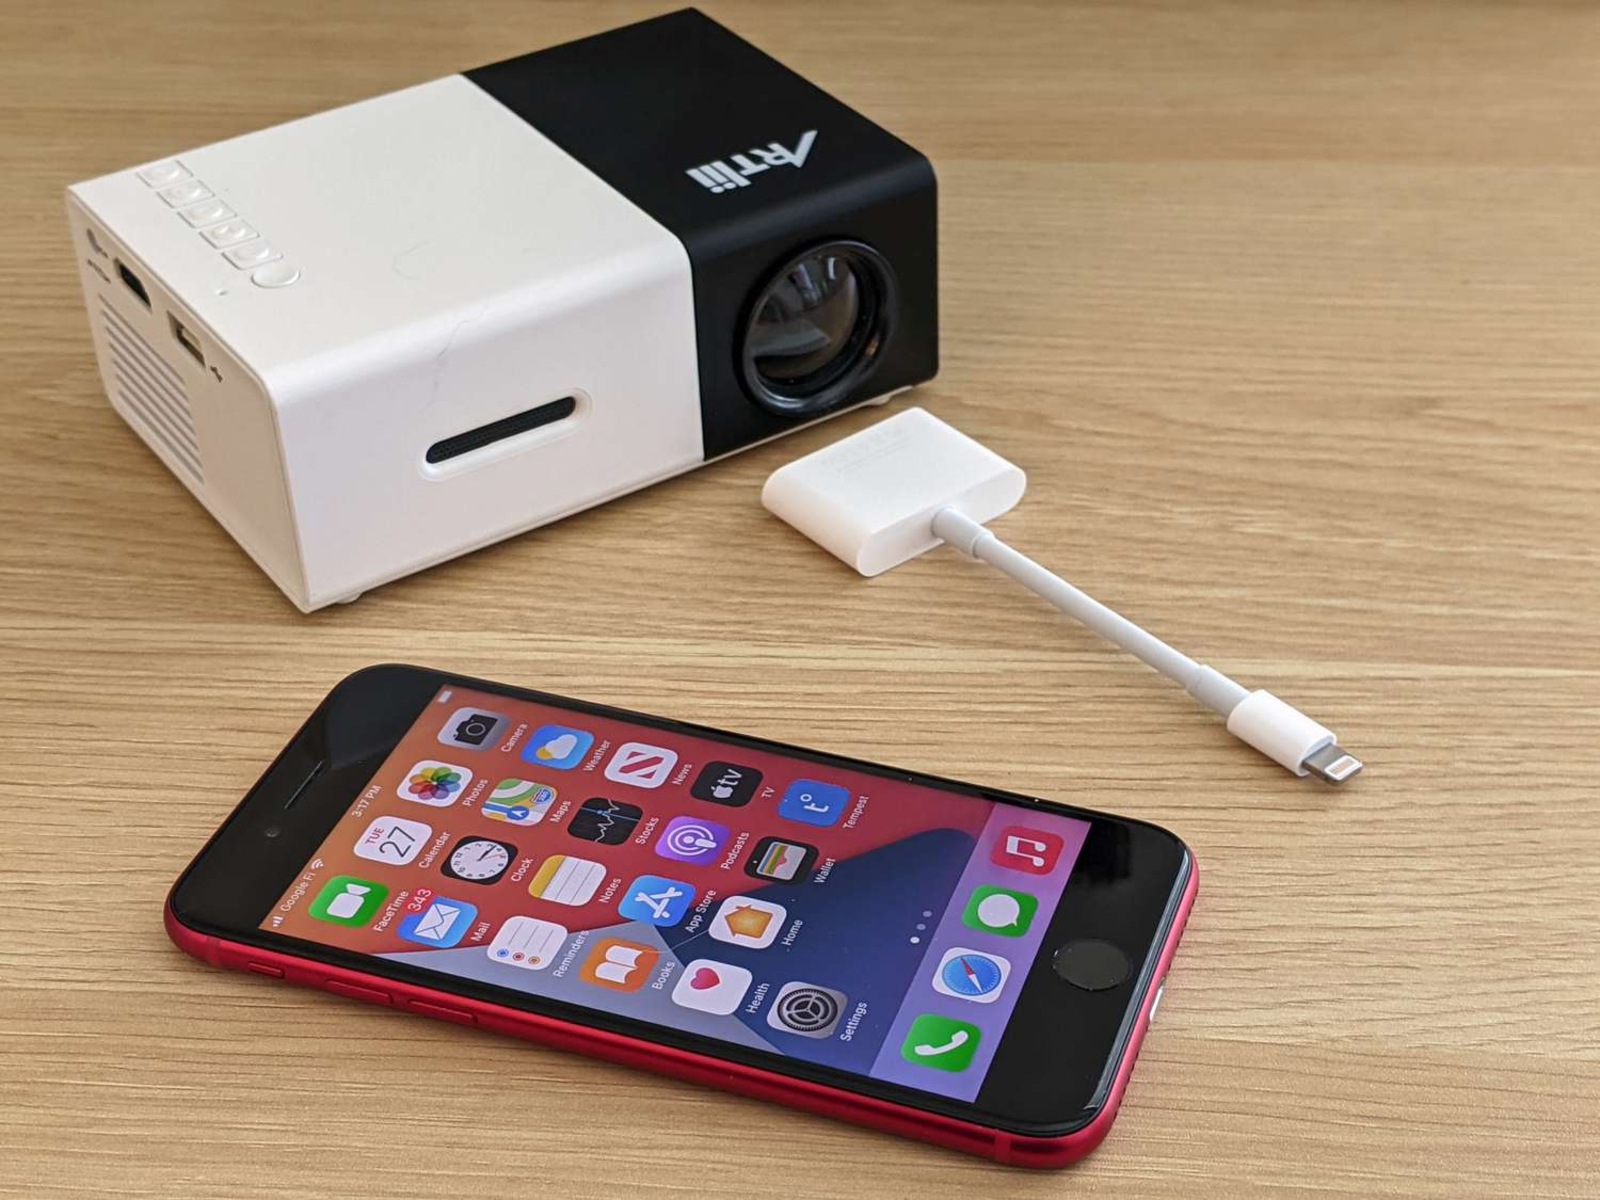 How To Connect Iphone To Projector Without HDMI